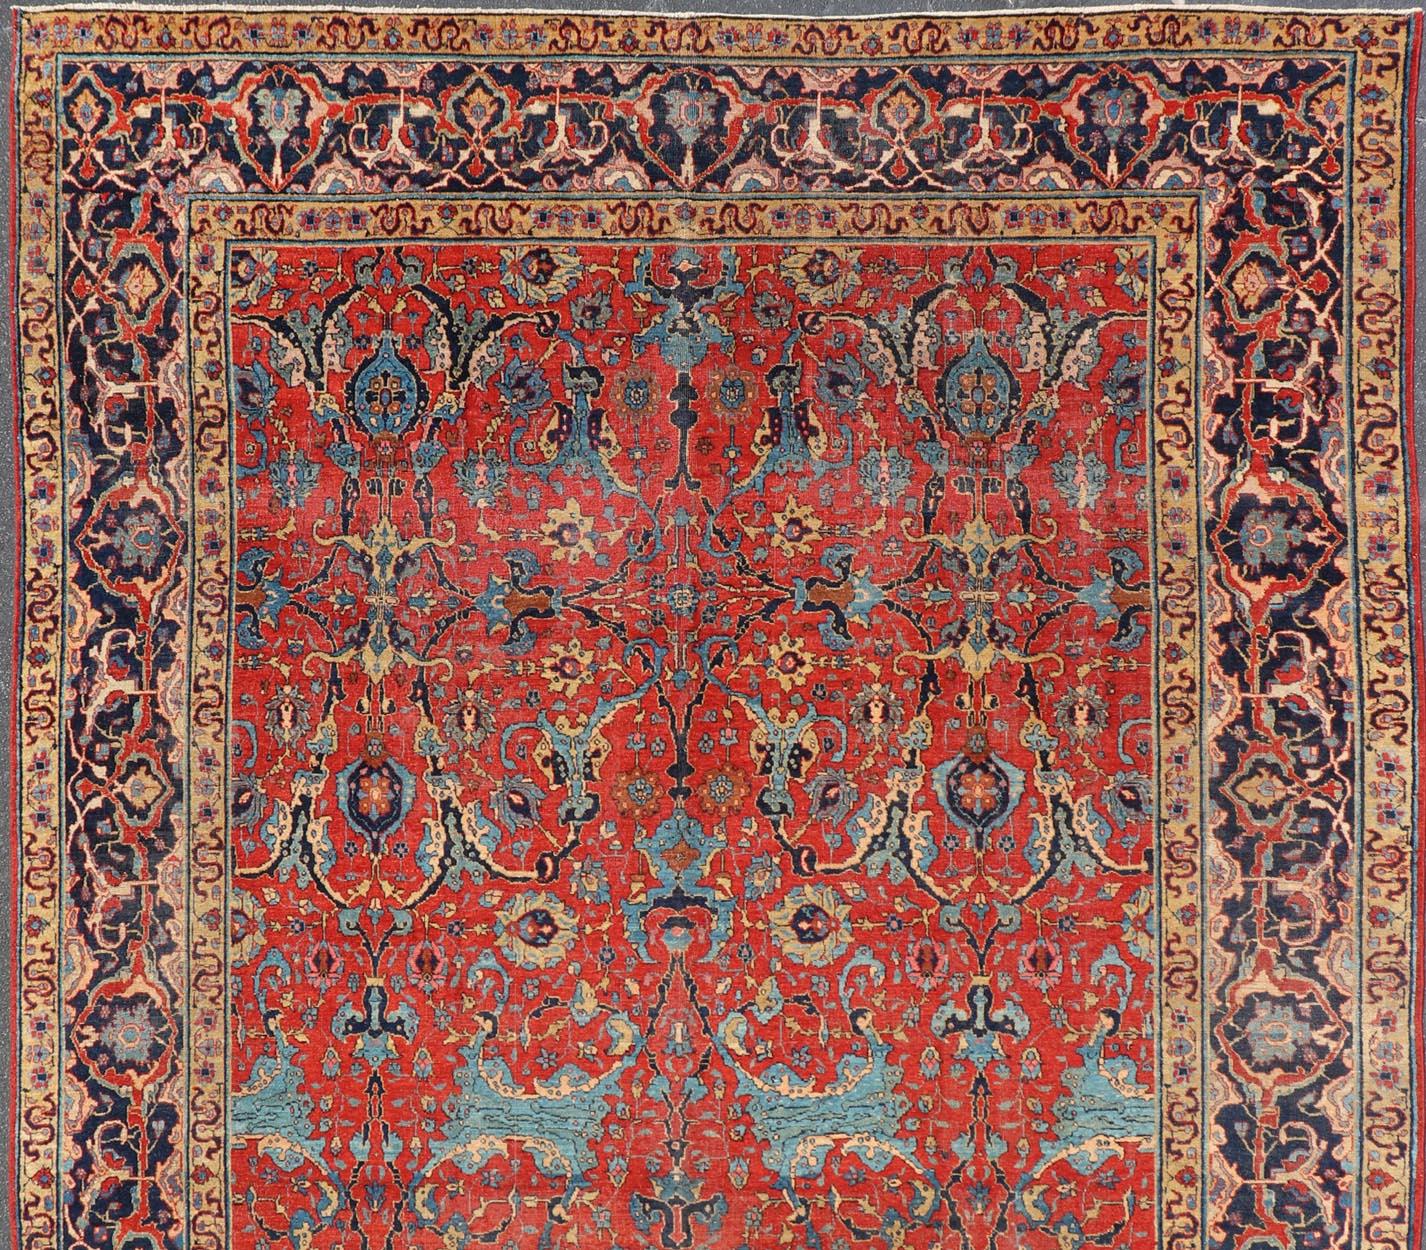 Antique Tabriz Rug with All Over Design in Rust Red, Blue's, Yellow, and L. Blue For Sale 5